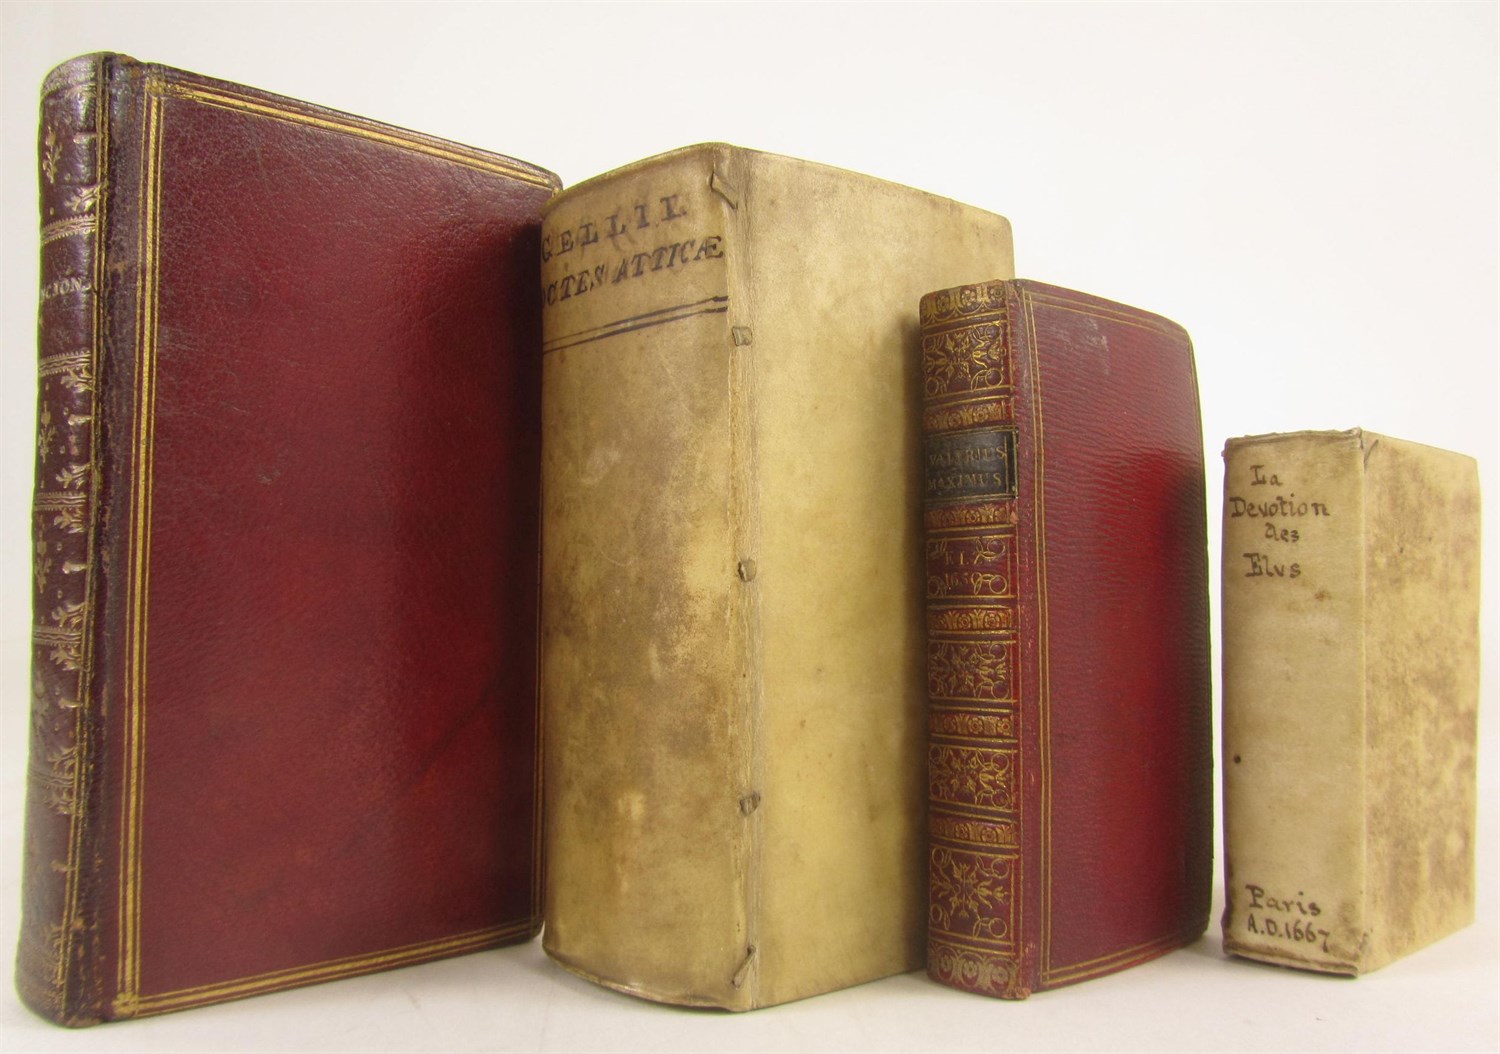 Lot 106 - Four 17th century books, 2 in red morocco, including Veratius, J.